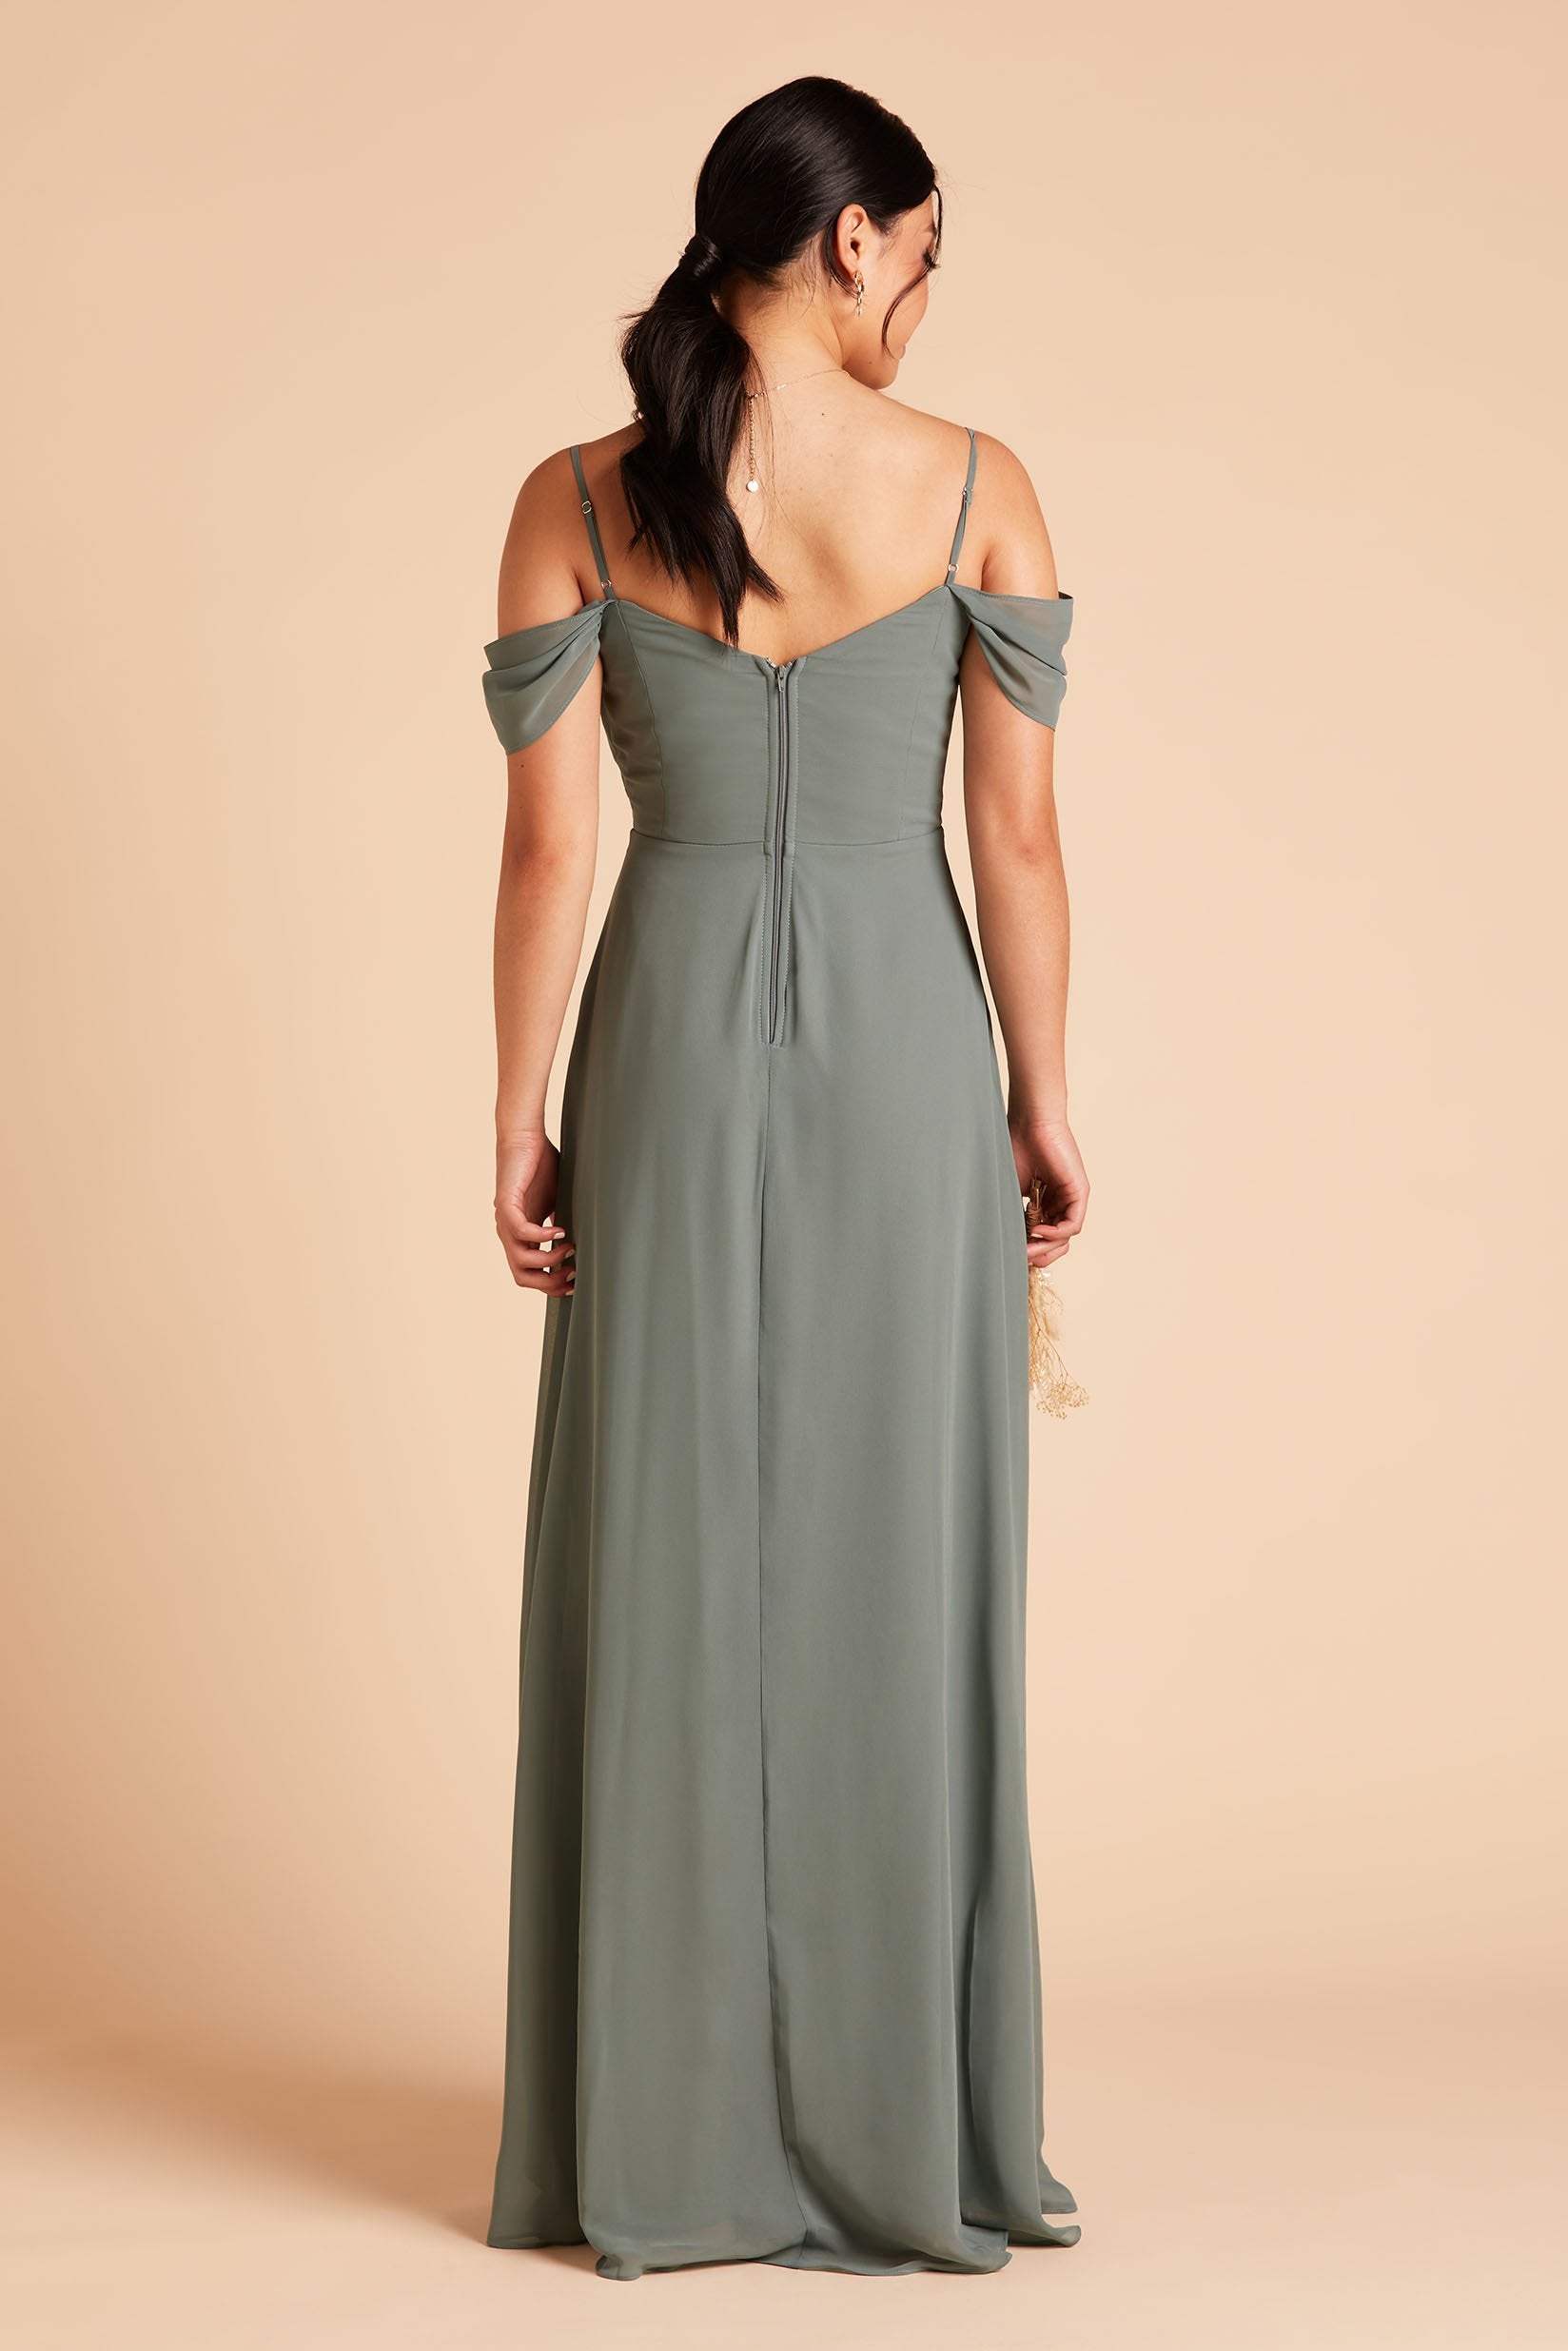 Spence convertible bridesmaid dress in sea glass green chiffon by Birdy Grey, back view